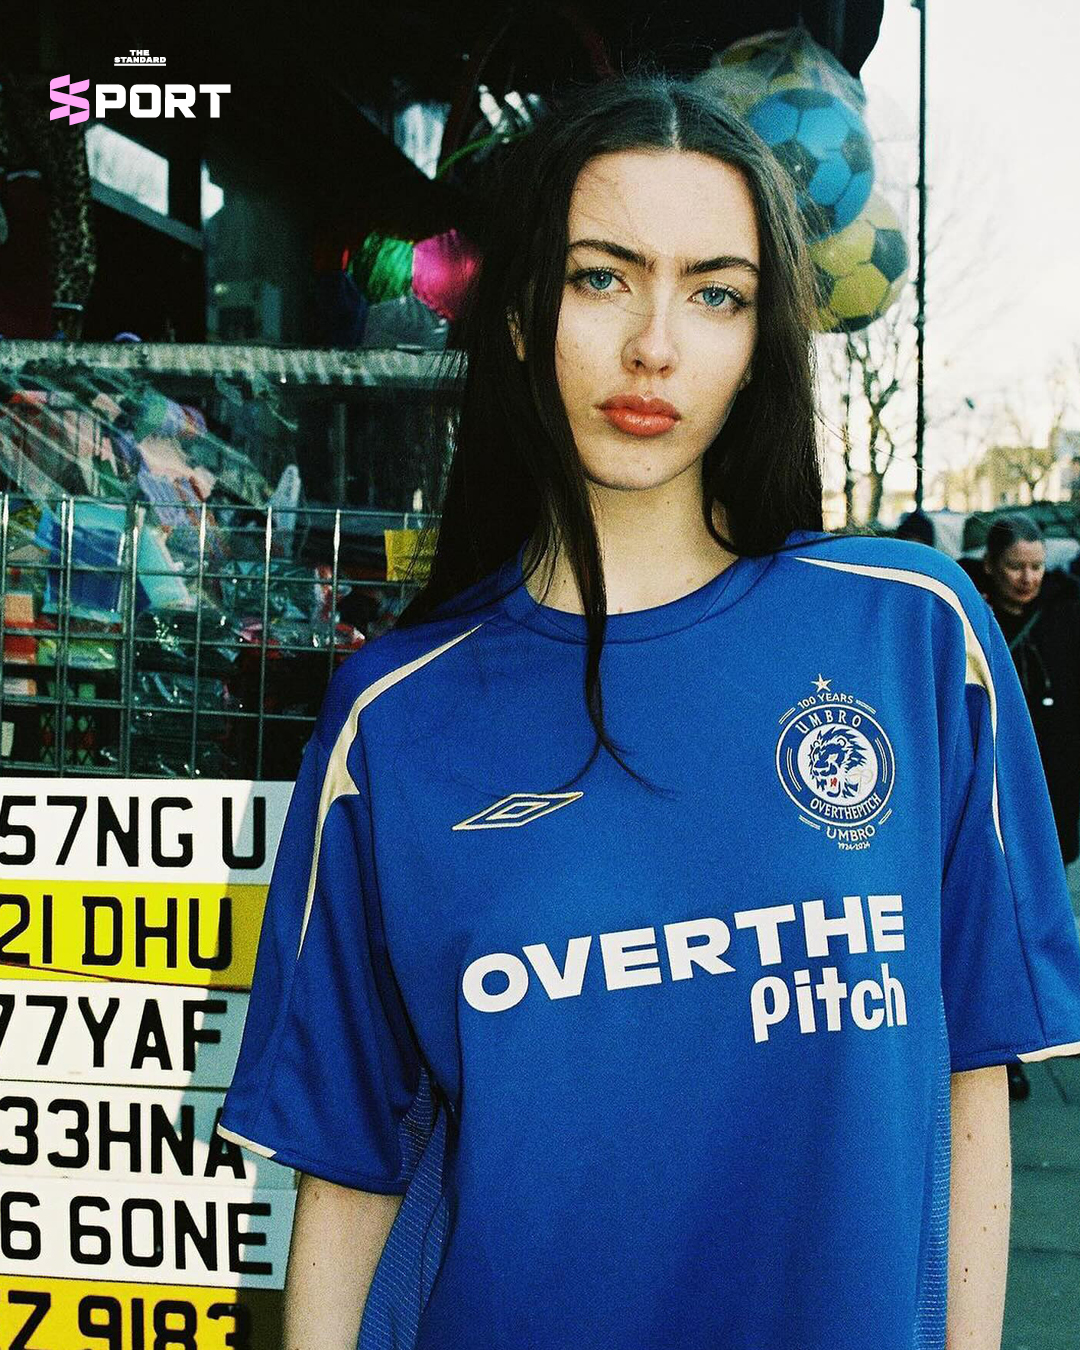 Over The Pitch x Umbro